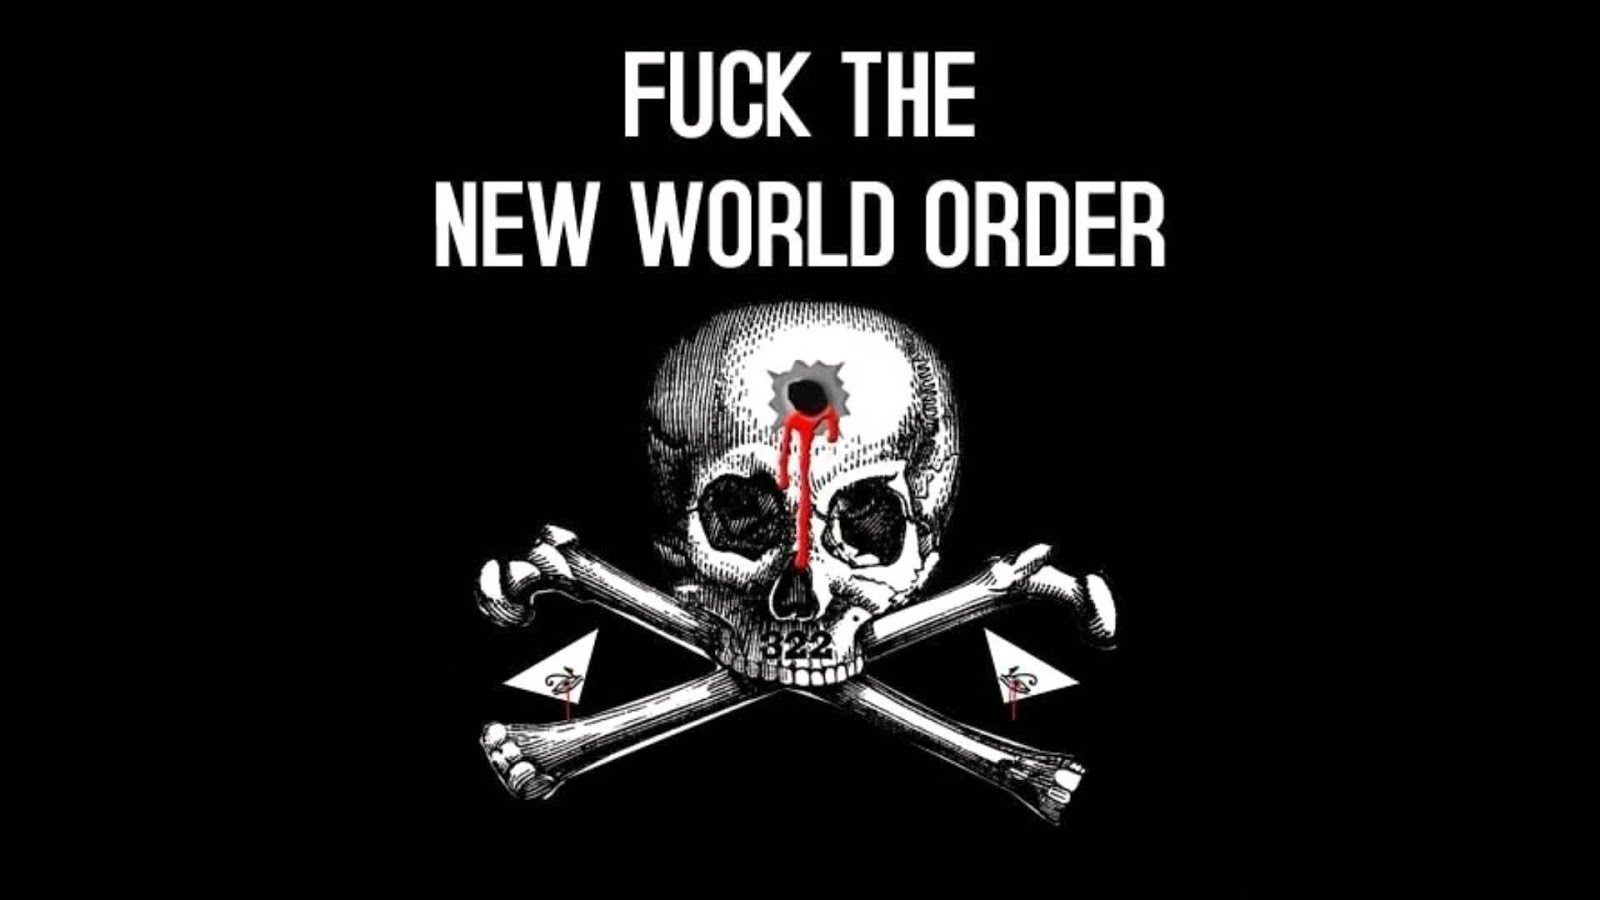 FUCK NEW WORD ORDER